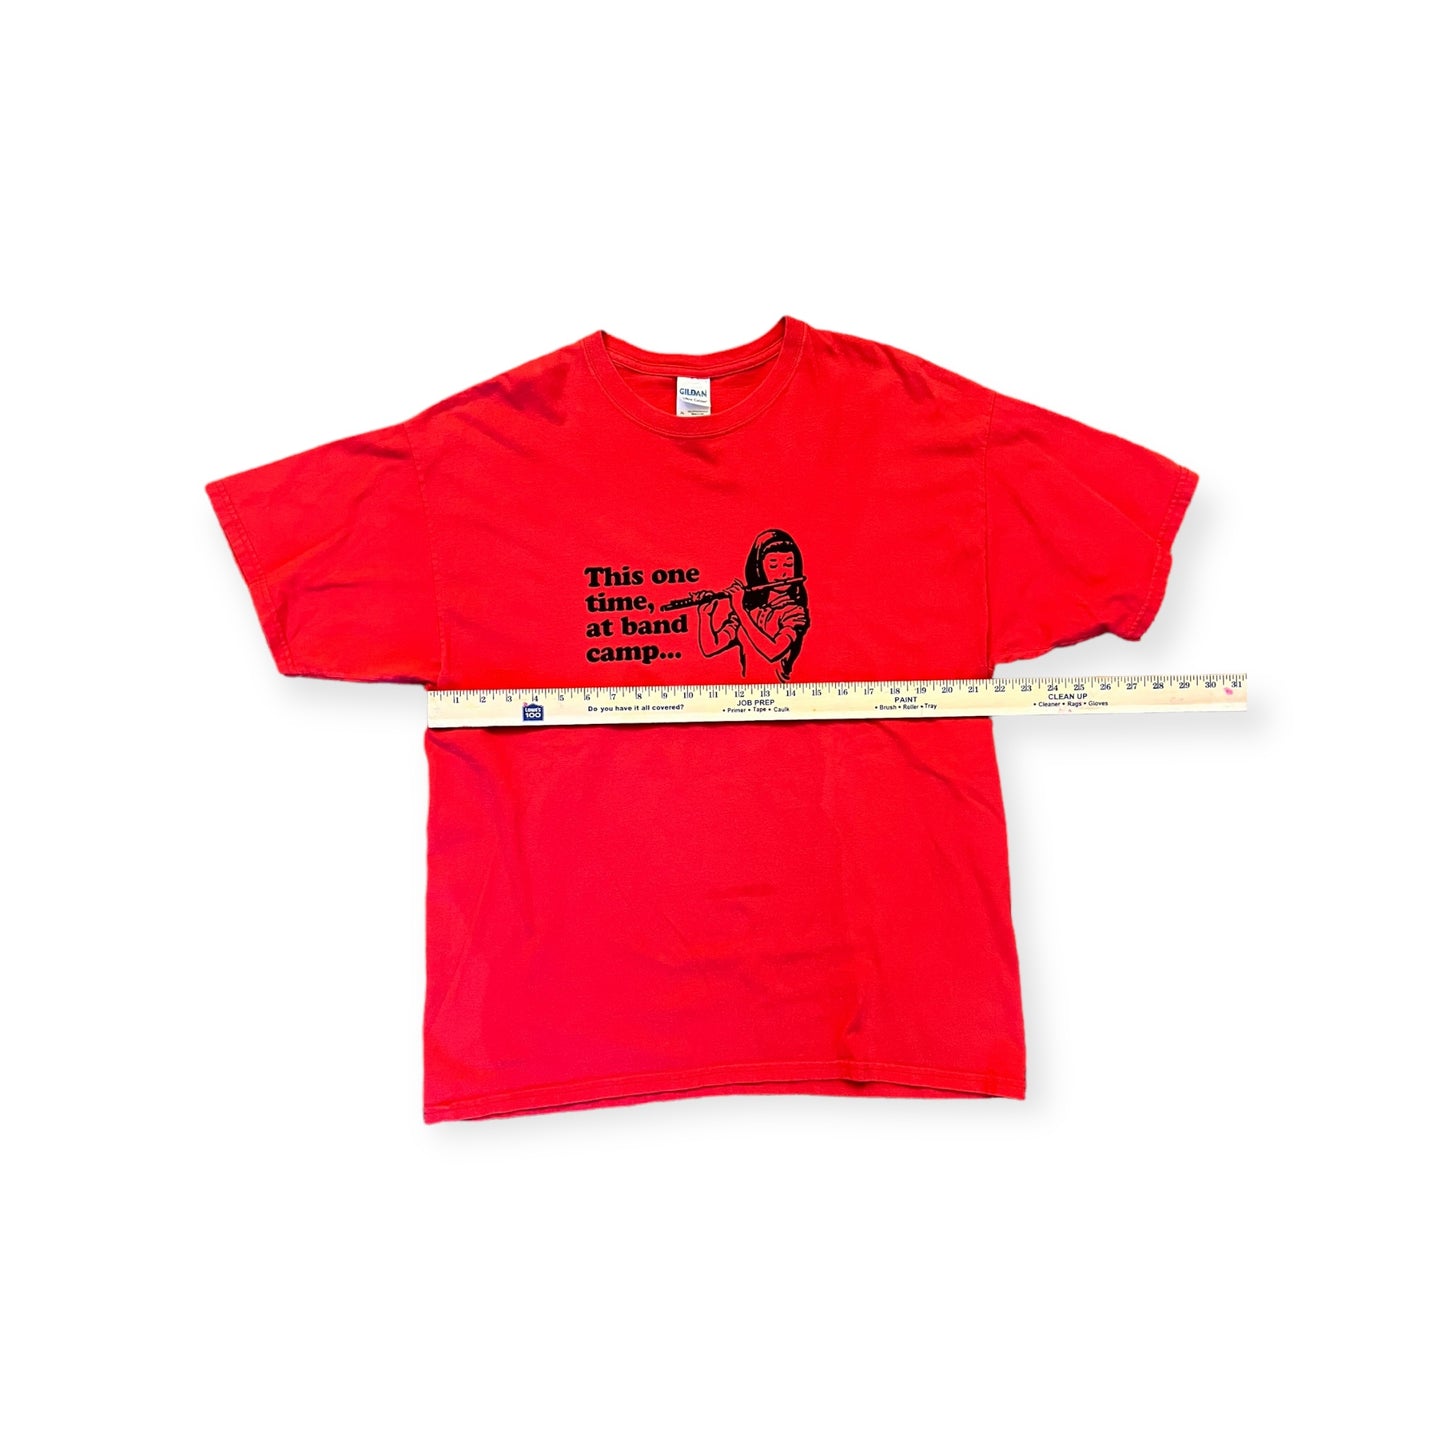 Vintage "One time at band camp" Tee - XL